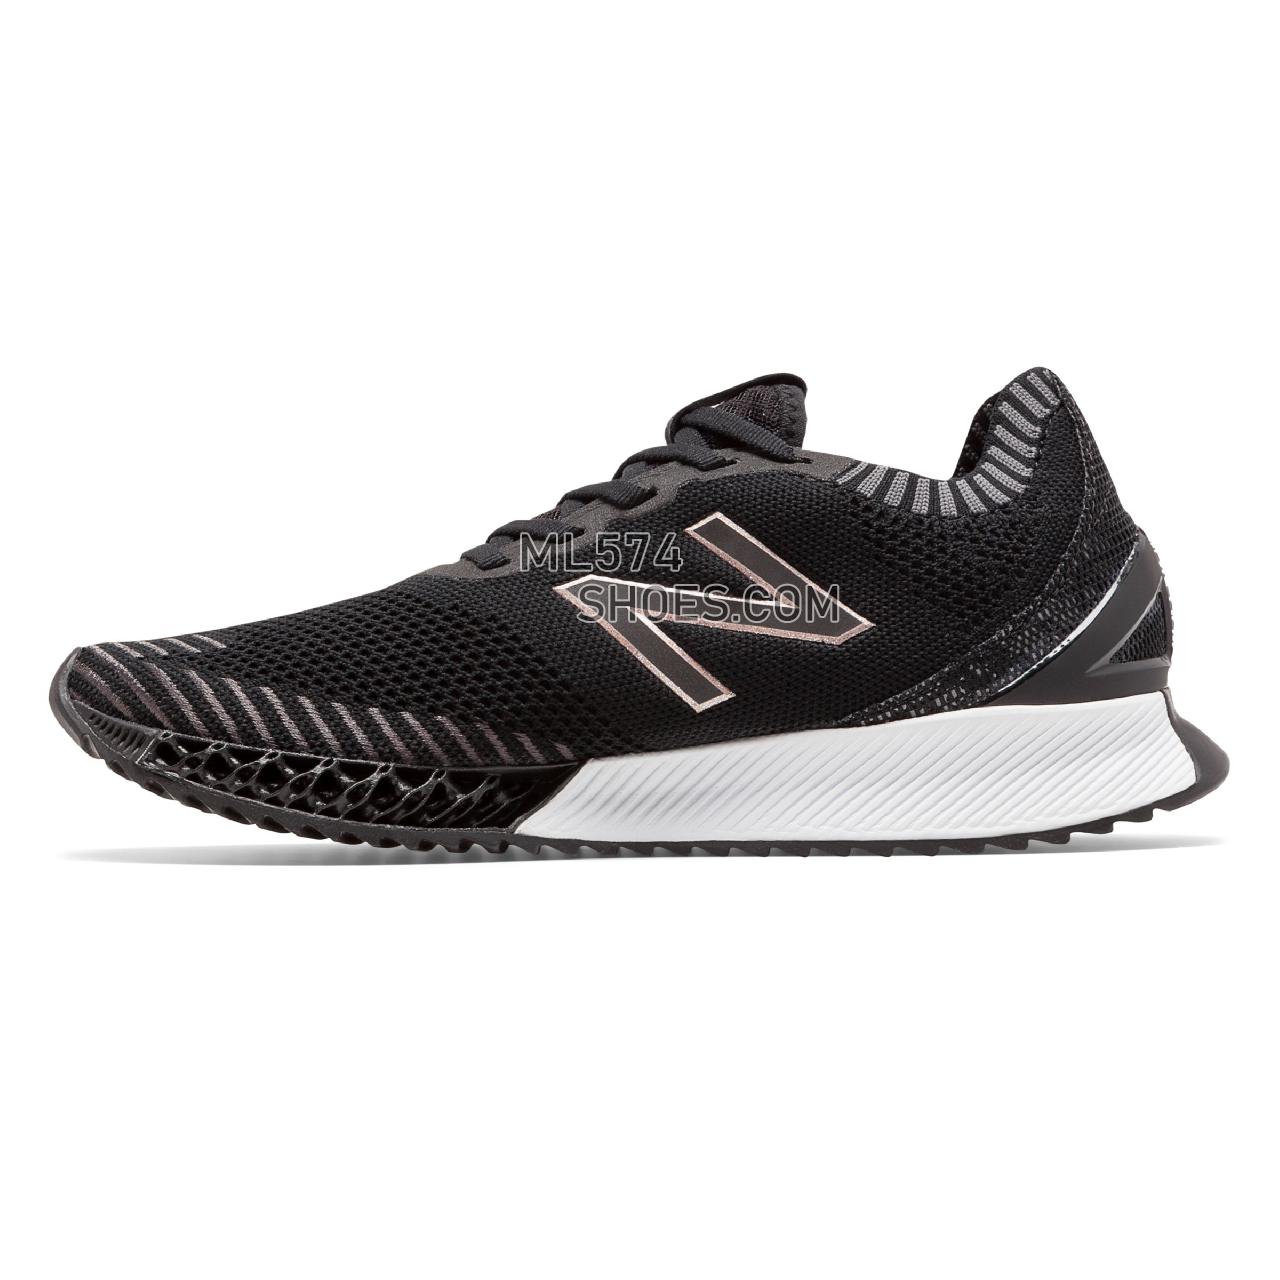 New Balance FuelCell Echo Triple - Women's Fuelcell TripleCell Echo WTRPBV1-26125-W - Black with Magnet and Rose Gold - WTRPBBR